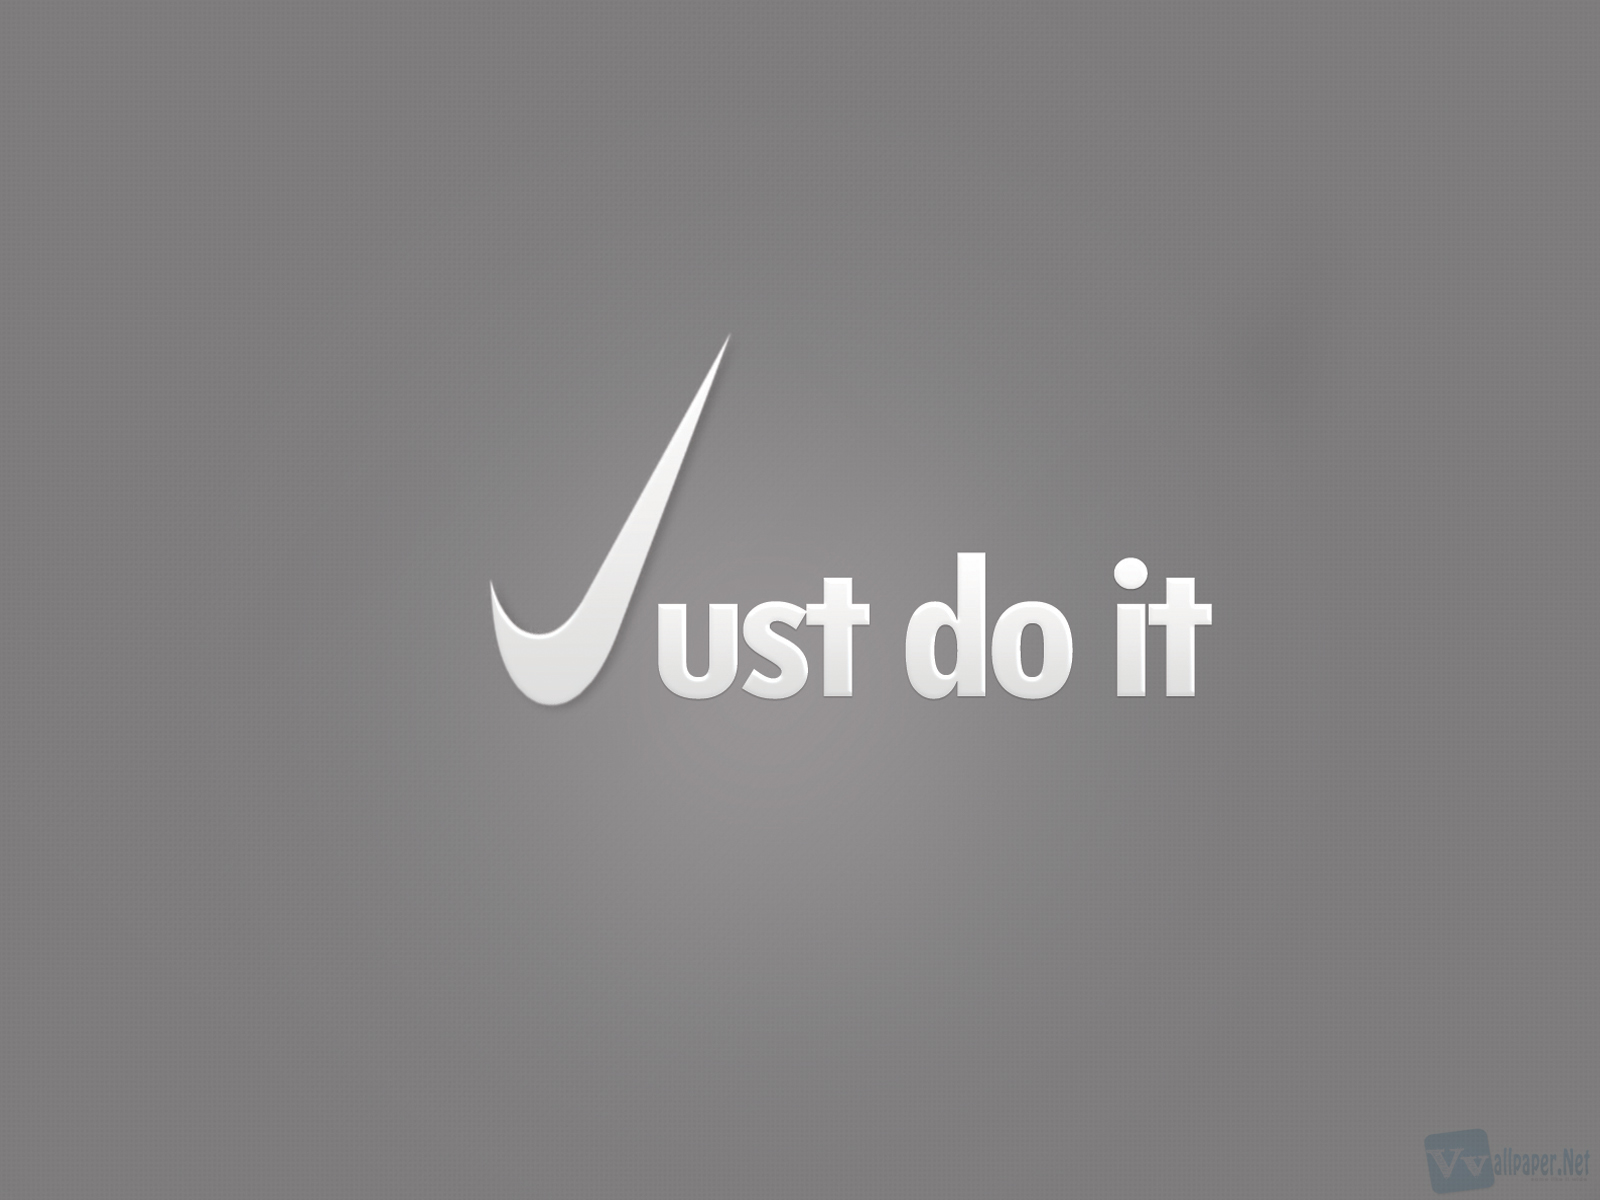 Nike Brand Logo Minimal HD Wallpapers HD Wallpapers Backgrounds 1600x1200